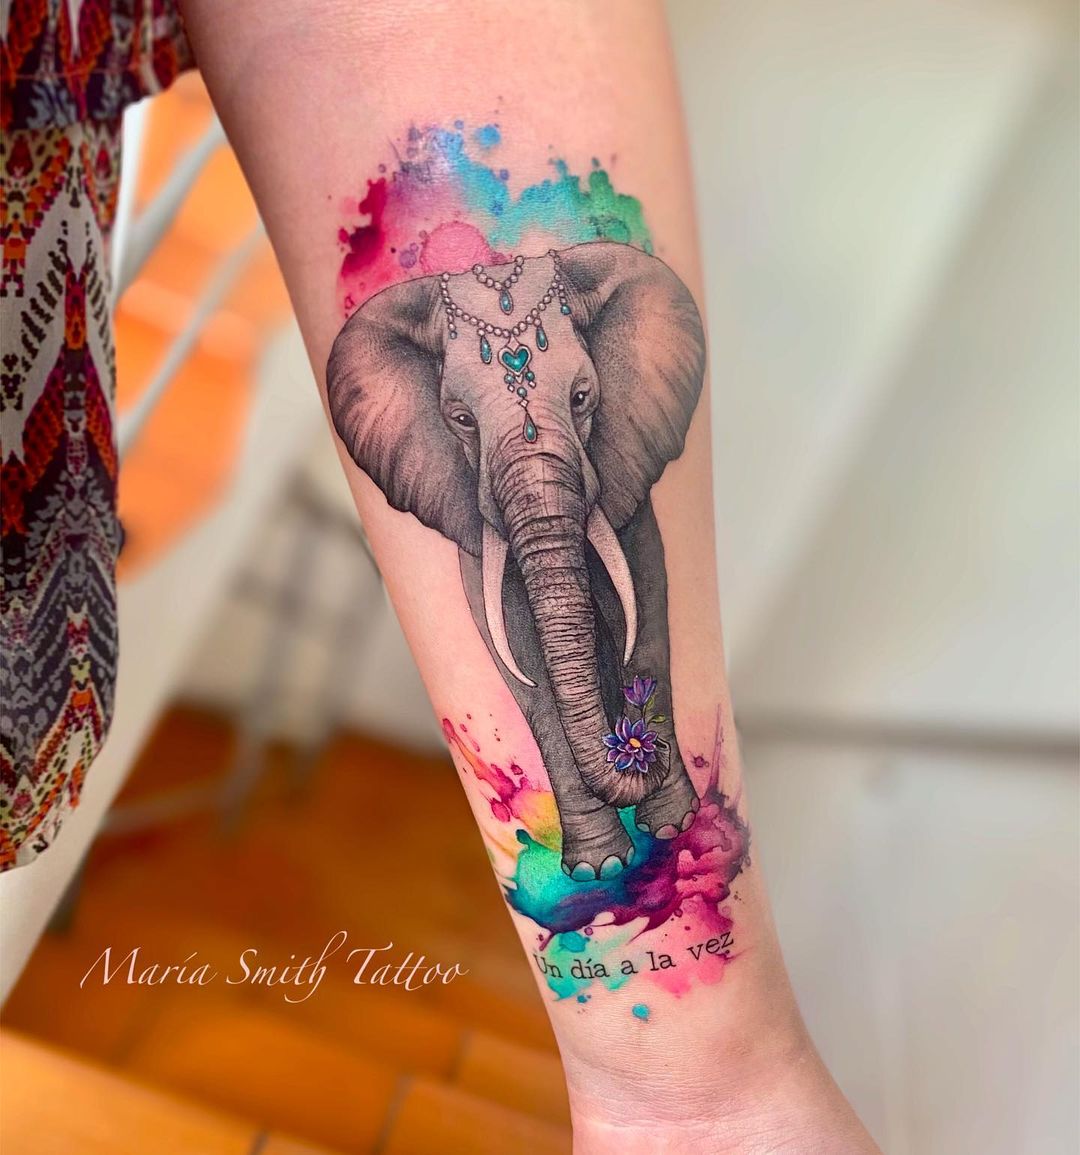 Tattoo uploaded by Steja  Small minimalistic watercolor elephant  More  works on my instagram nikitatattoo tattooartist tattooart linework  lineworker lineworktattoo watercolortattoo colortattoo colourtattoo  elephanttattoo inked 